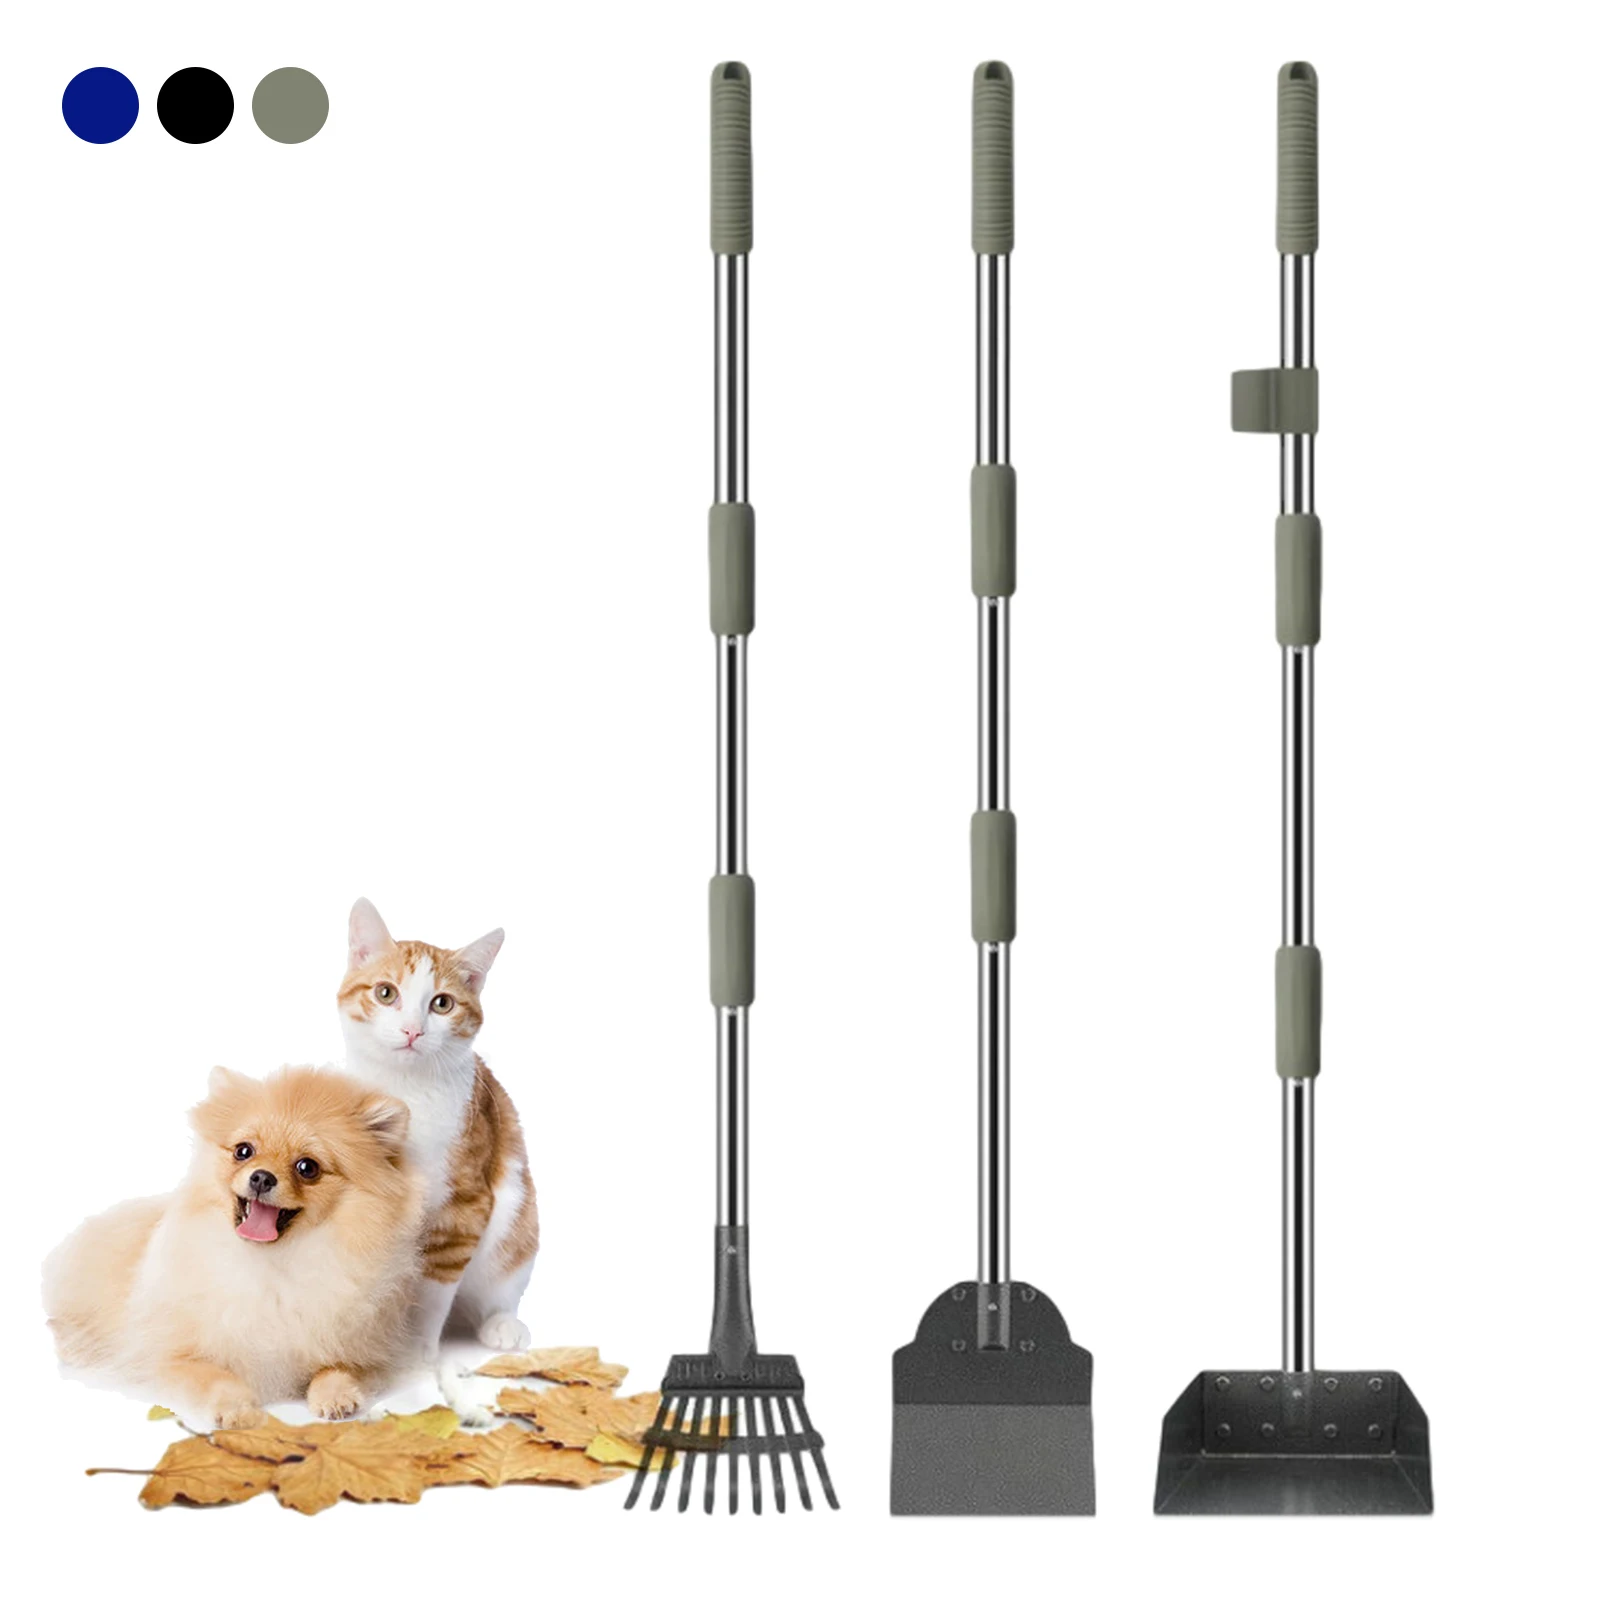 

Dog Pooper Scooper Pet Poop Broom 3PCS Detachable With Metal Rake Tray Spade For Pets Grass Dirt Gravel Cleaning Great Gift